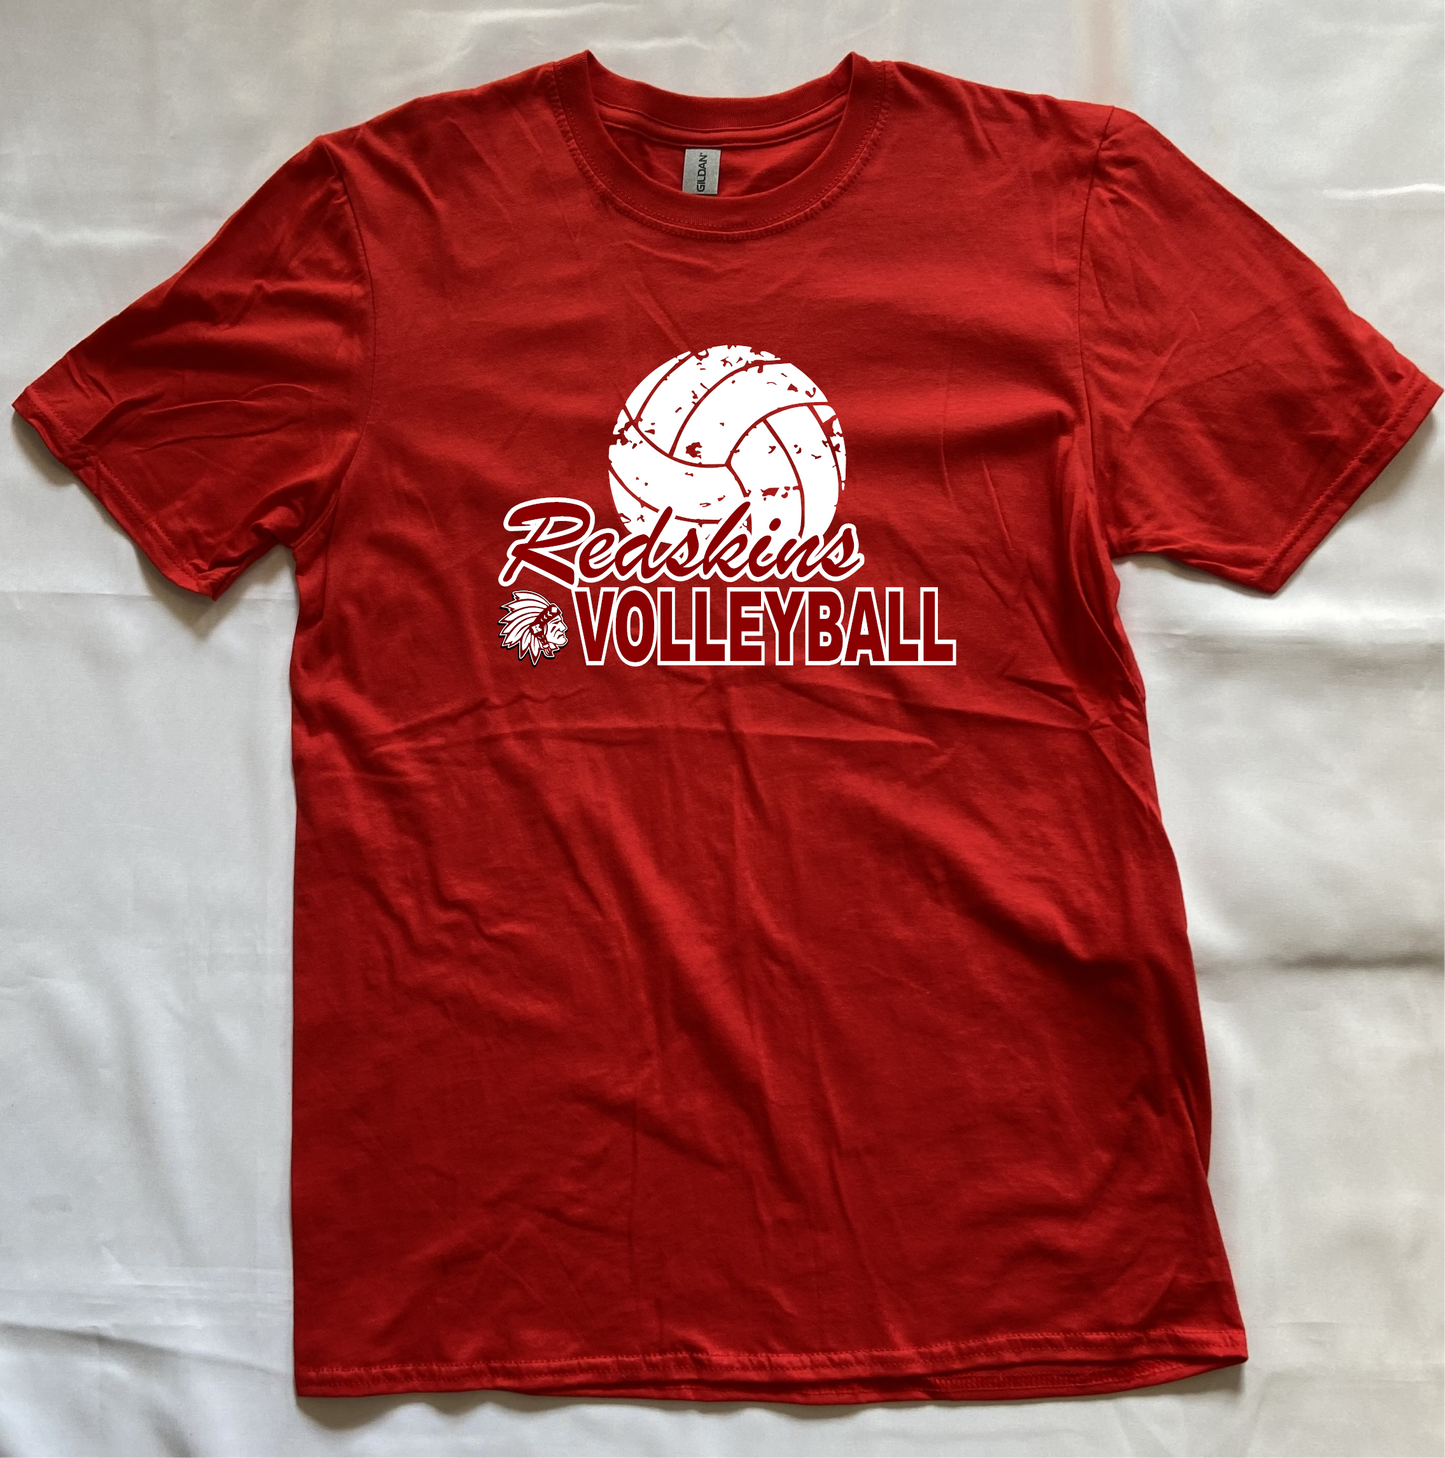 Knox Redskins VOLLEYBALL Team T-shirt - Red - Adult and Youth Sizes